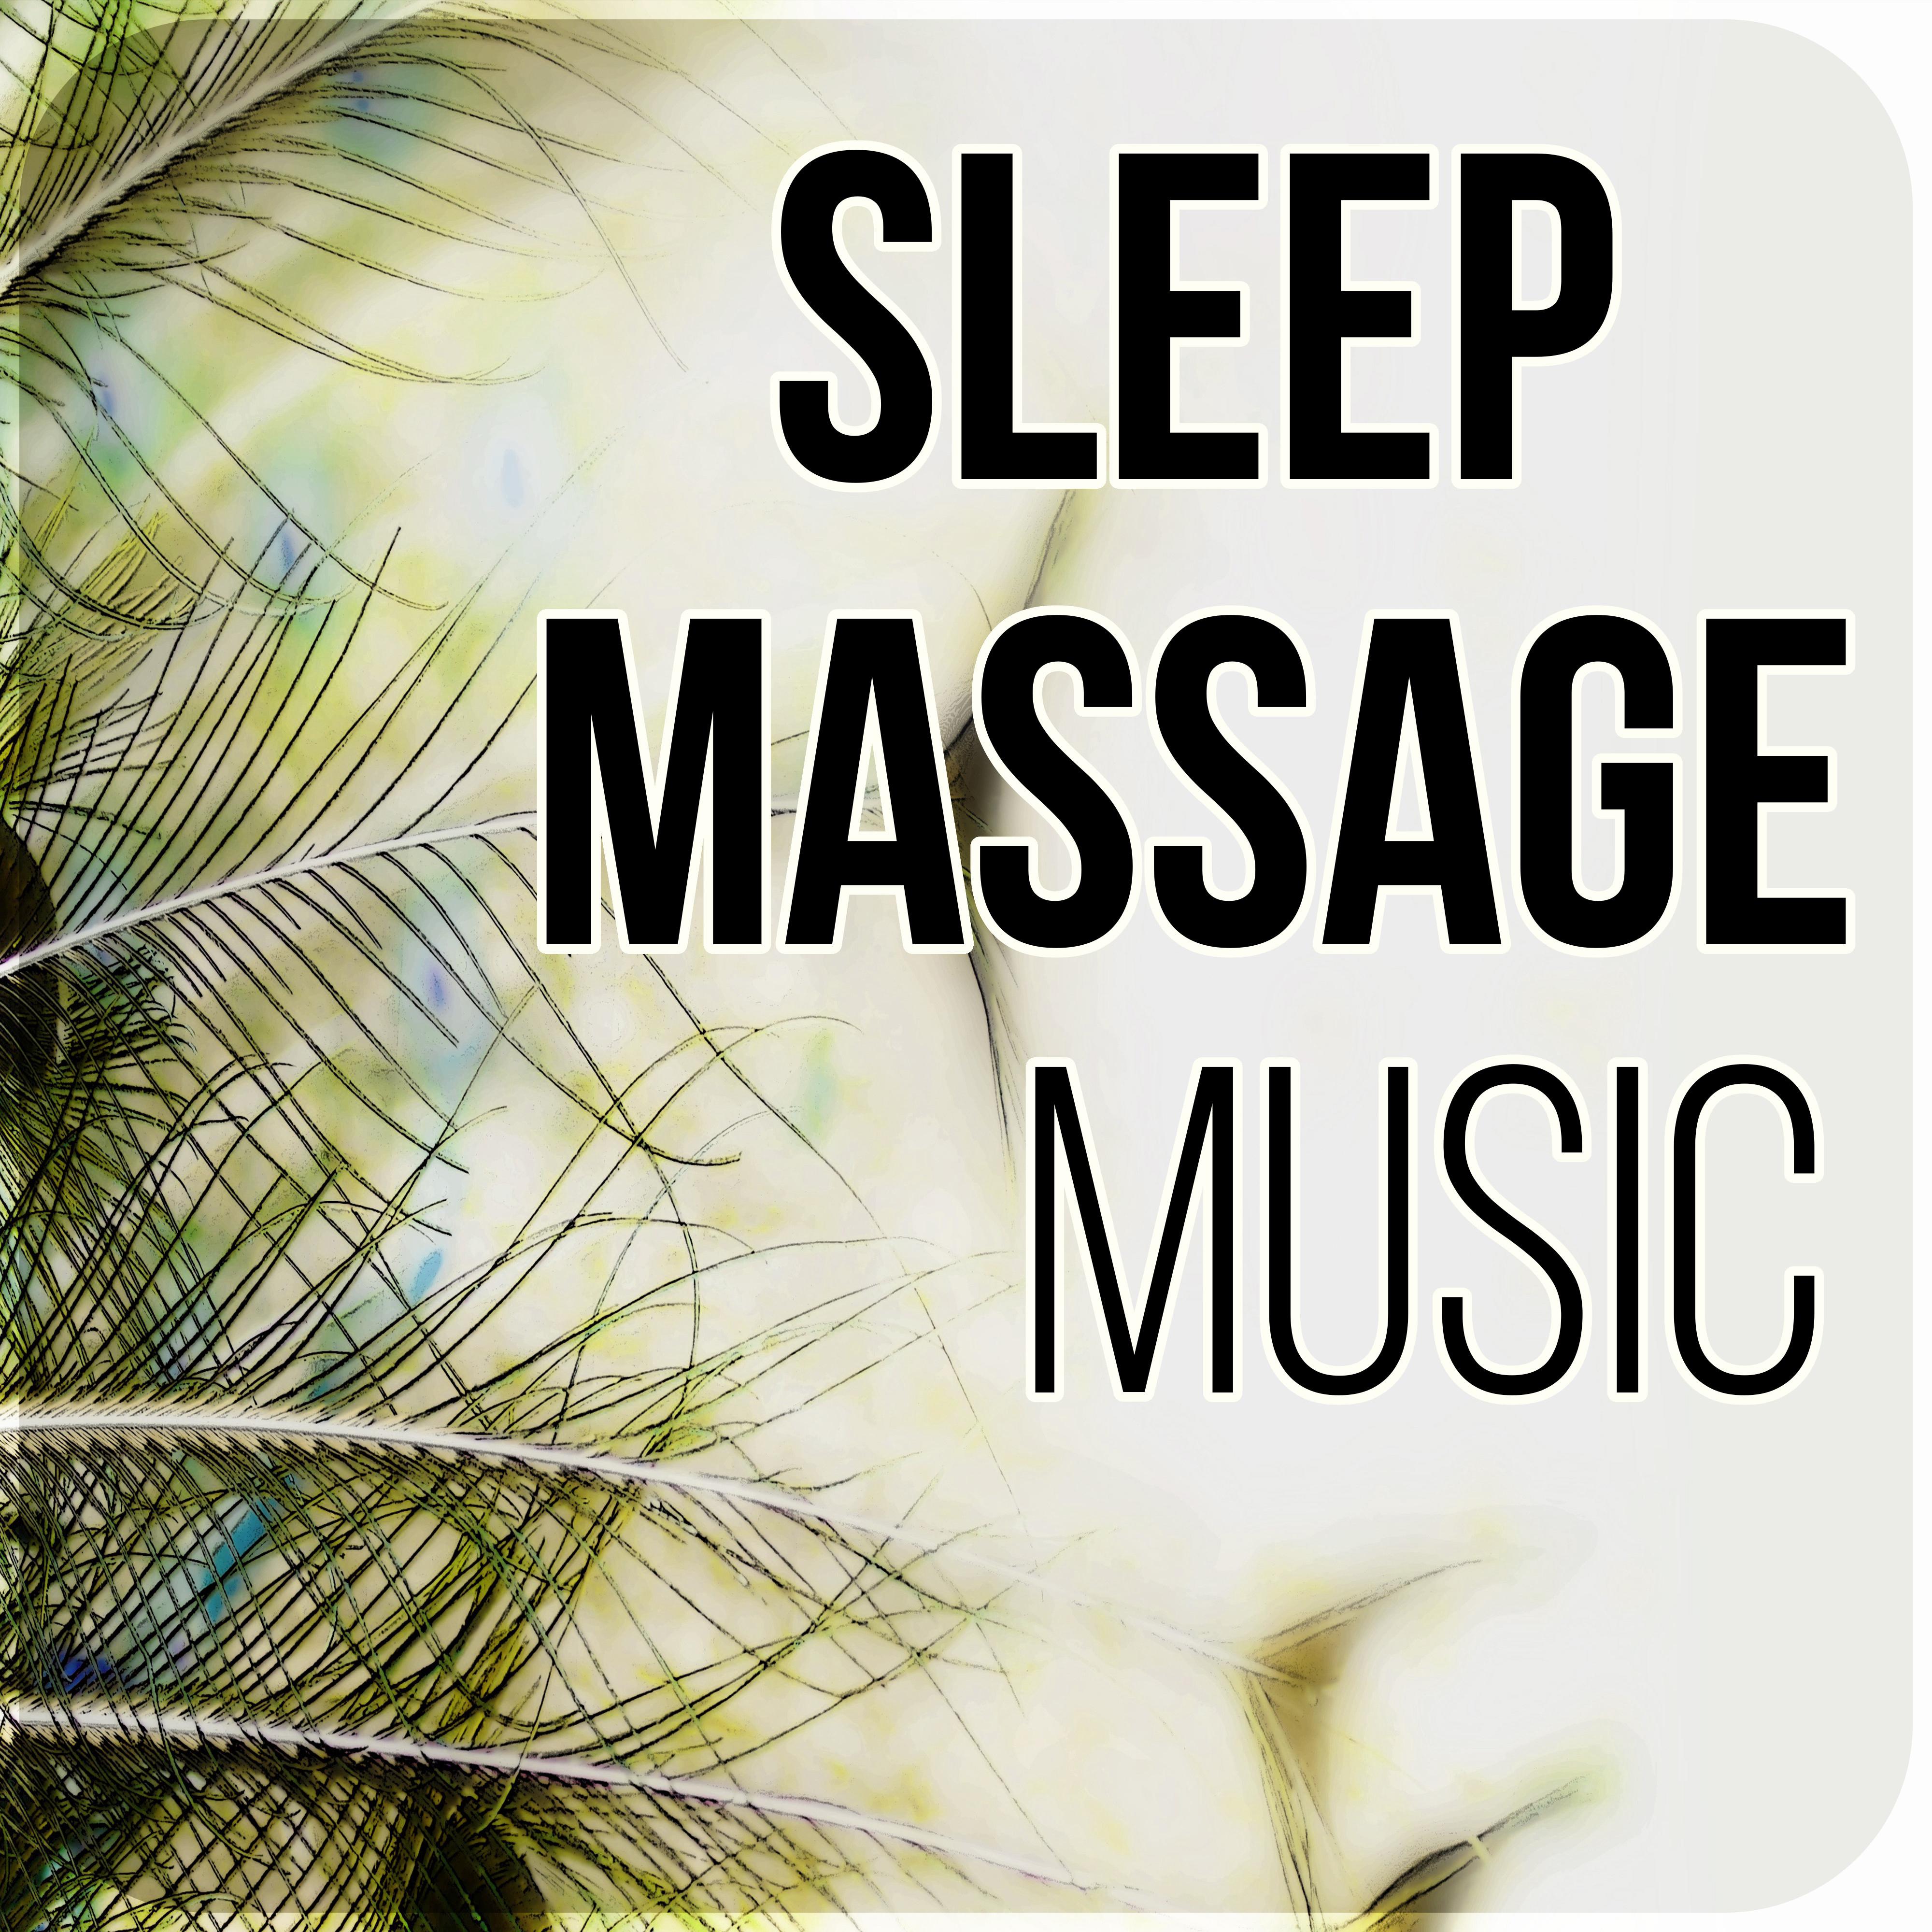 Sleep Massage Music - Sleep Music to Help You Relax all Night, Serenity Lullabies, Restful Sleep Relieving Insomnia, Relaxing Nature Sounds, Healing Music, New Age